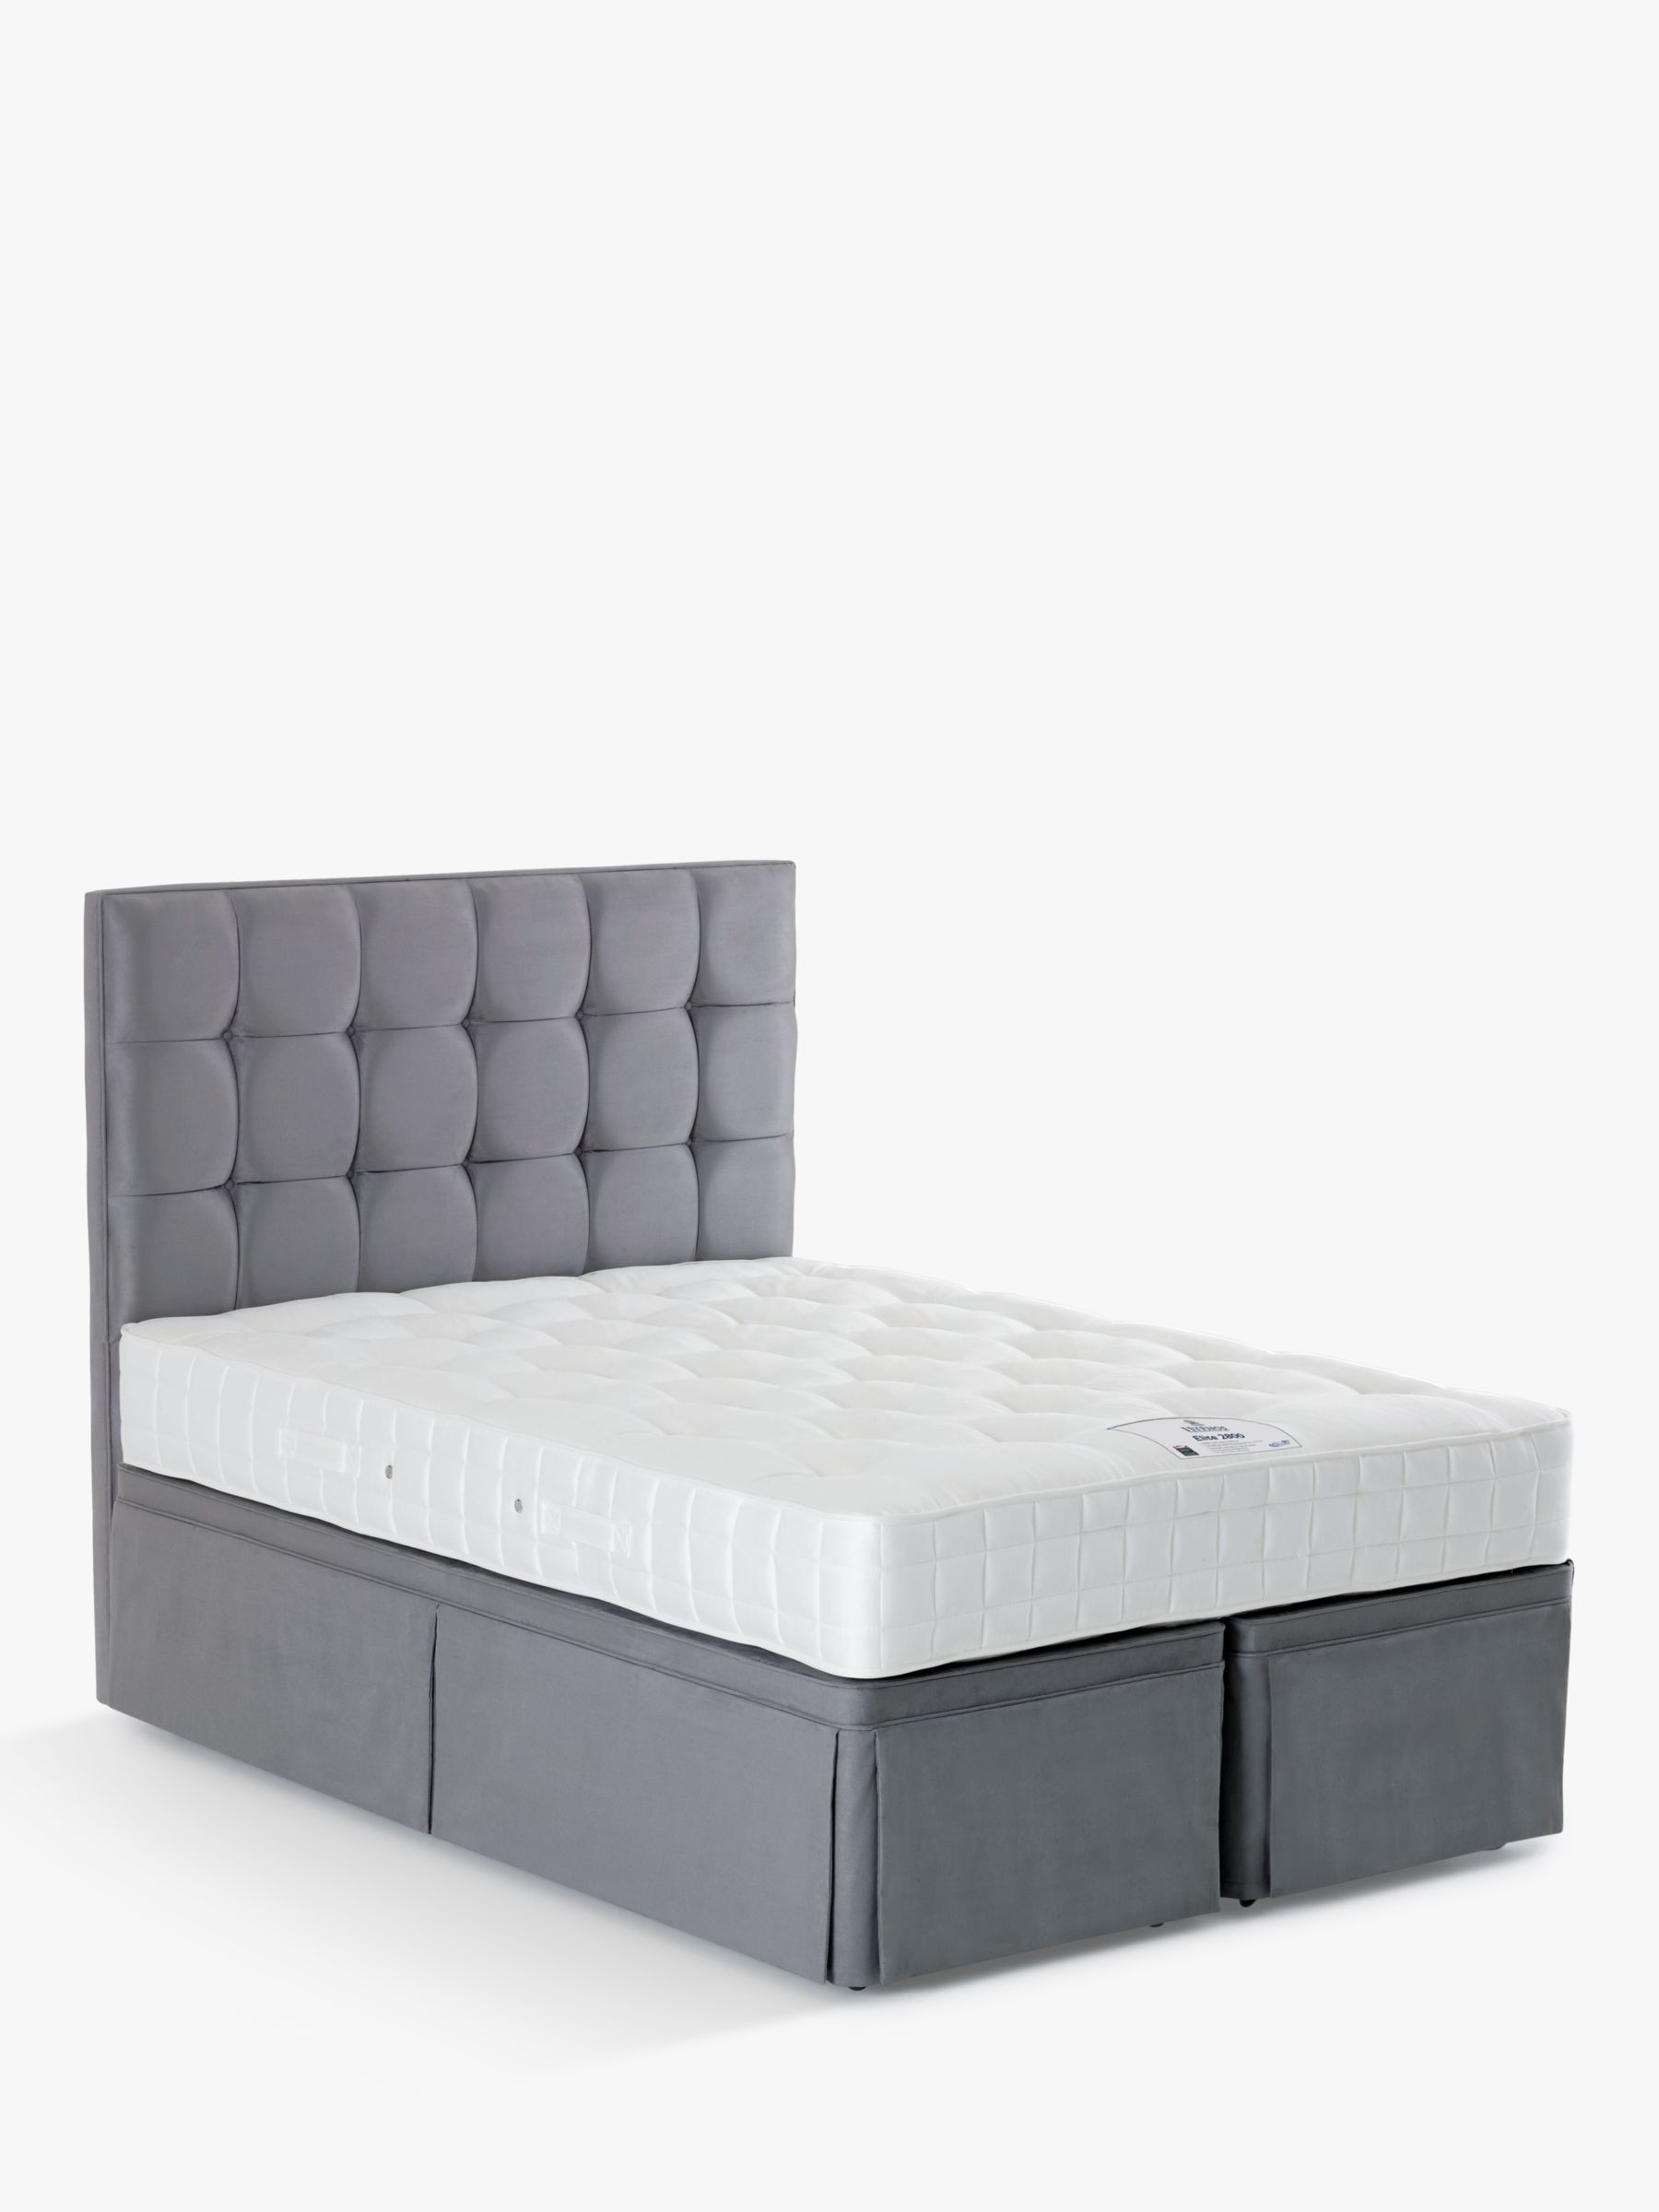 Photo of Hypnos hideaway storage upholstered divan base single imperio grey